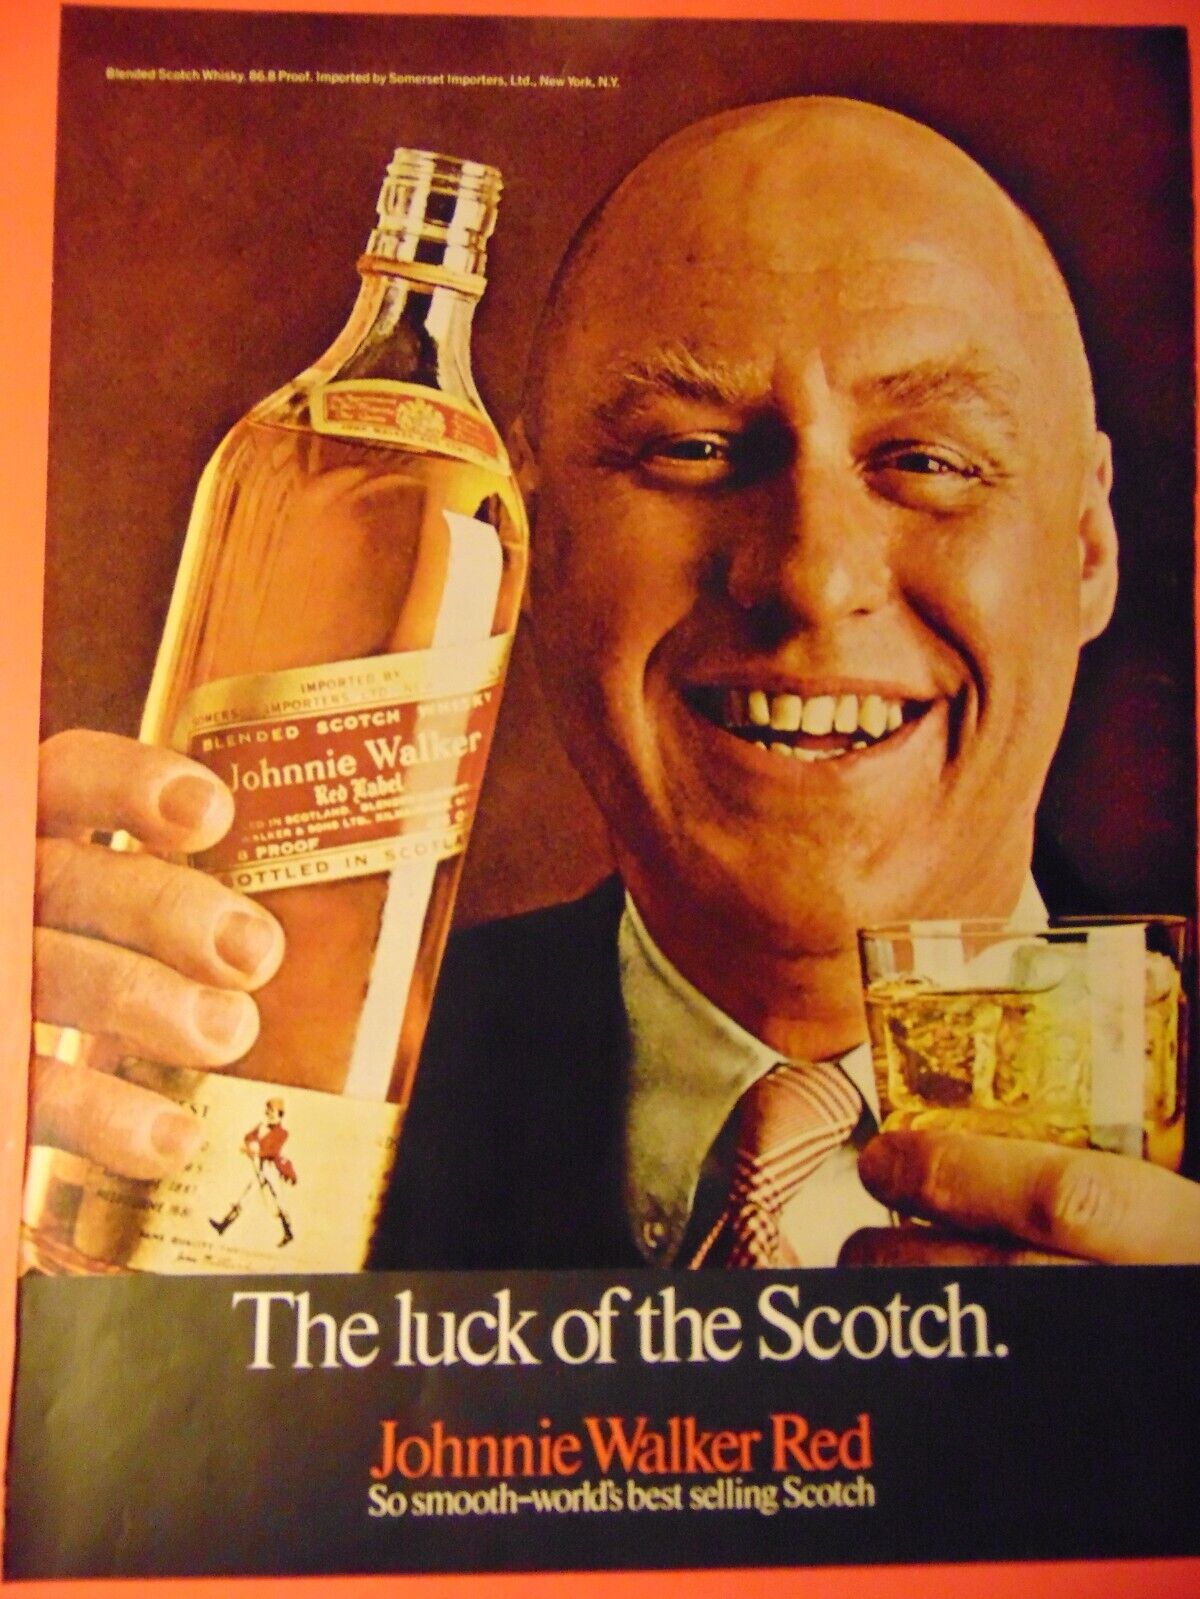 1969 Johnnie Walker Red Luck of The Scotch vintage print ad